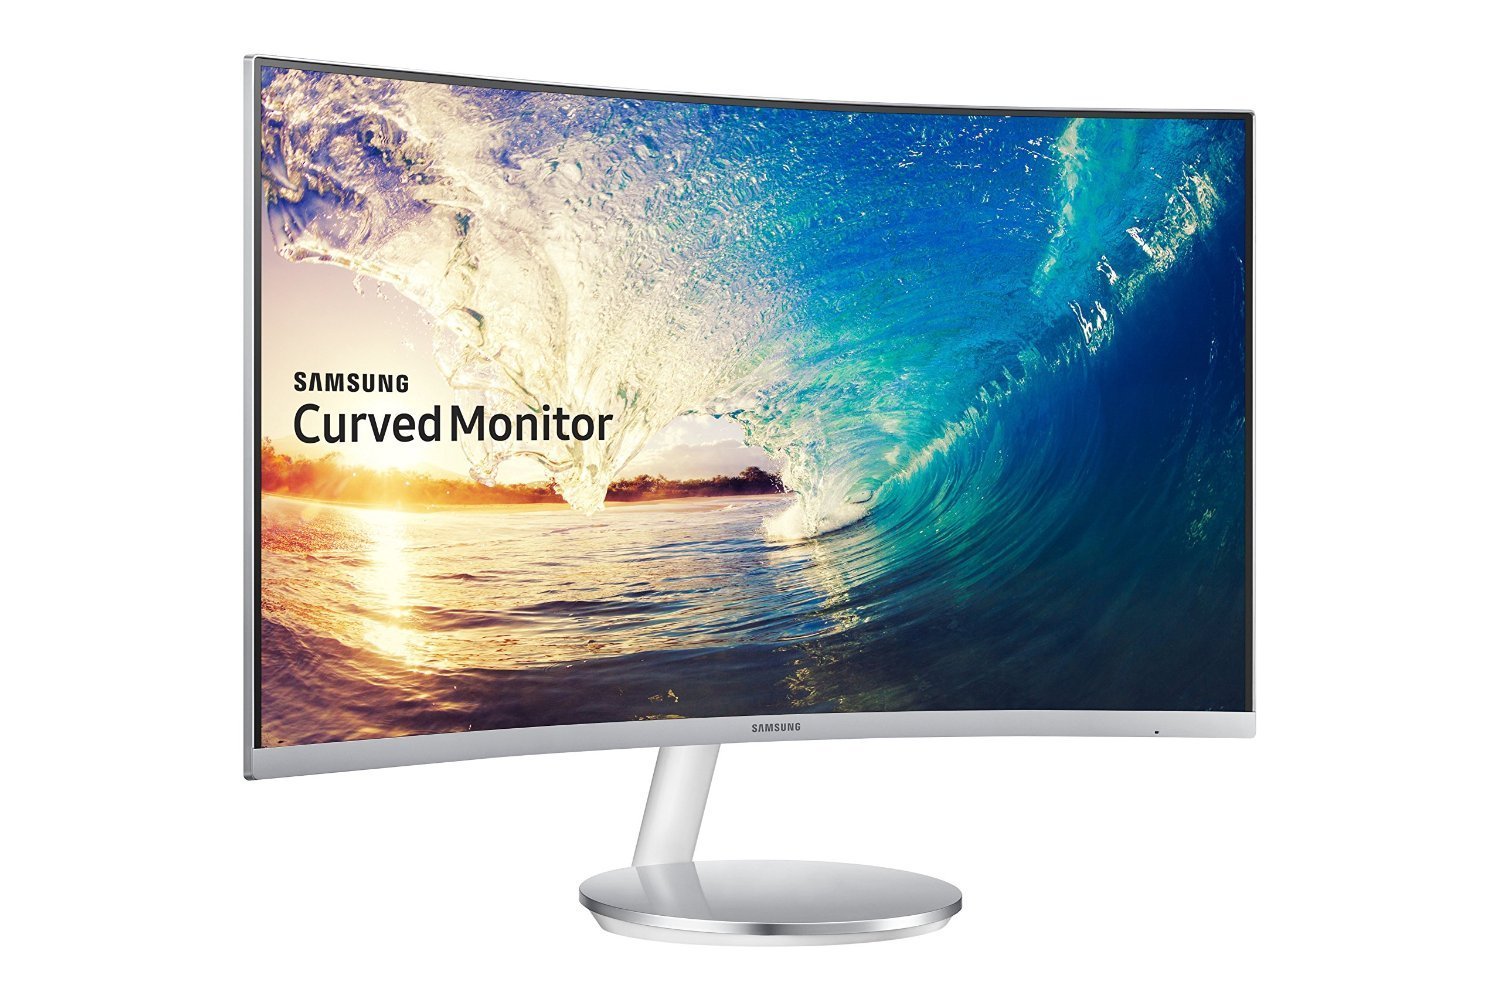 Samsung 27-inch Curved LED Monitor